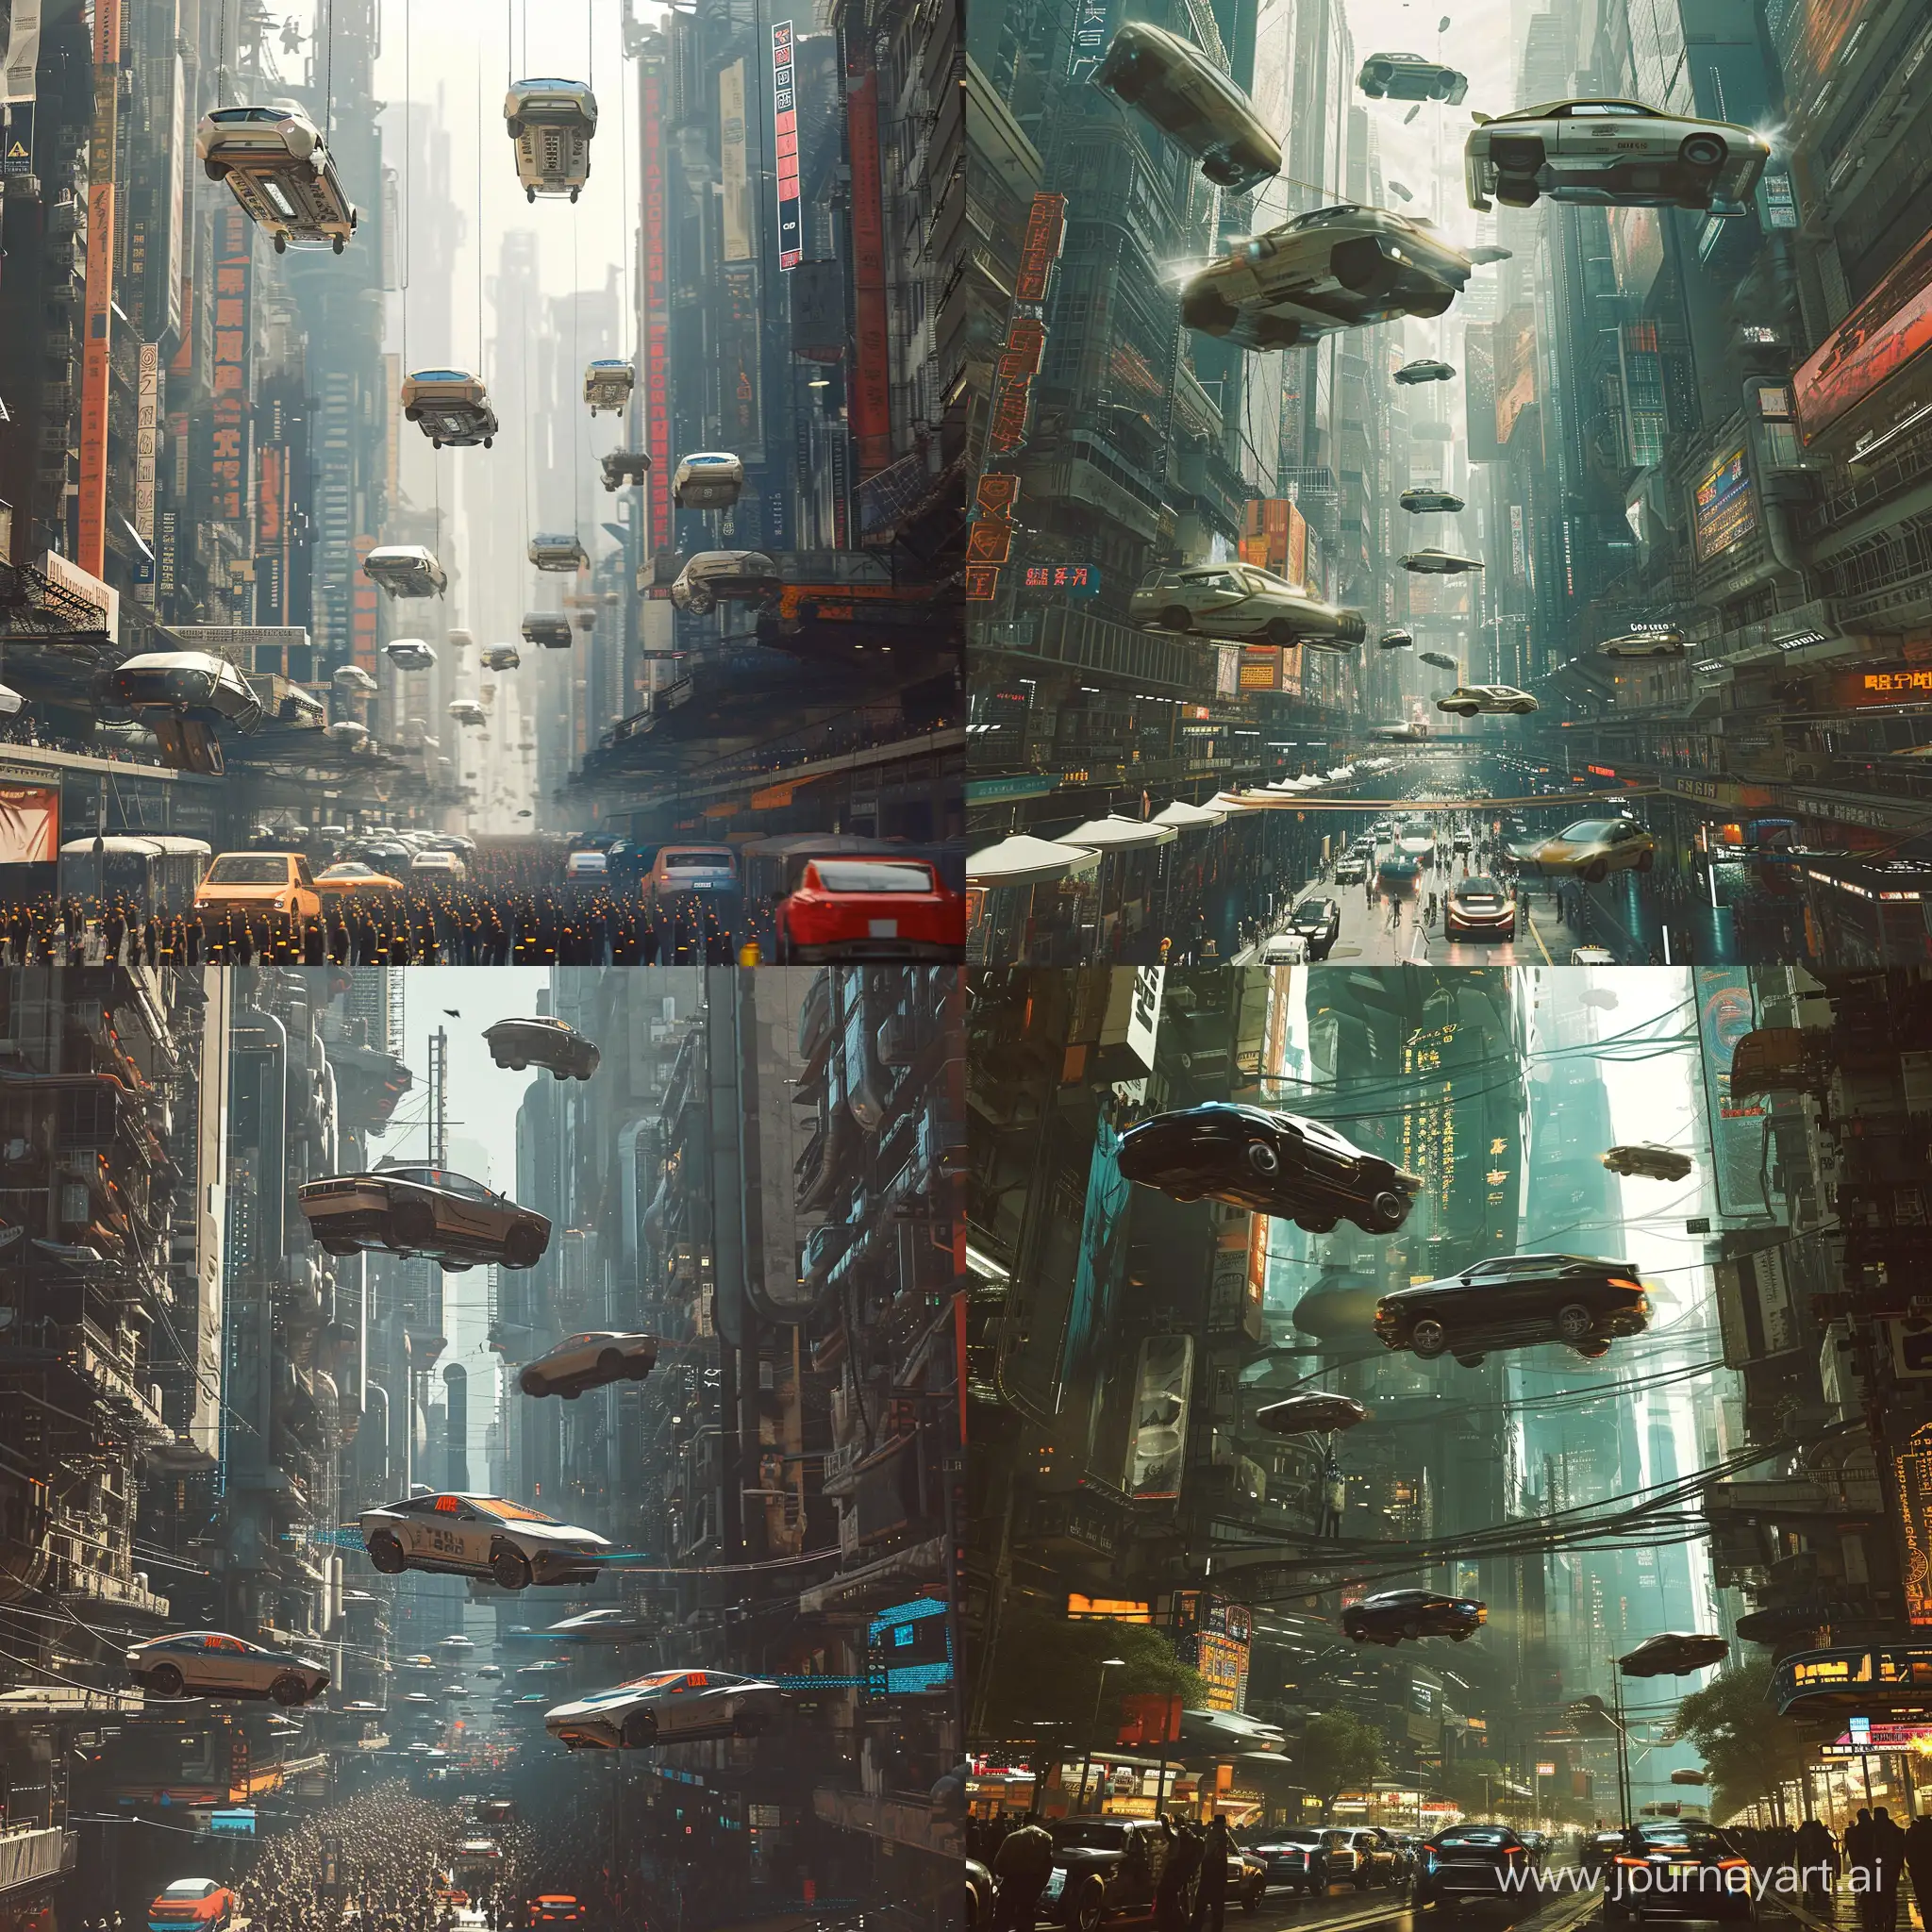 Futuristic-Cyberpunk-Cityscape-with-Flying-Cars